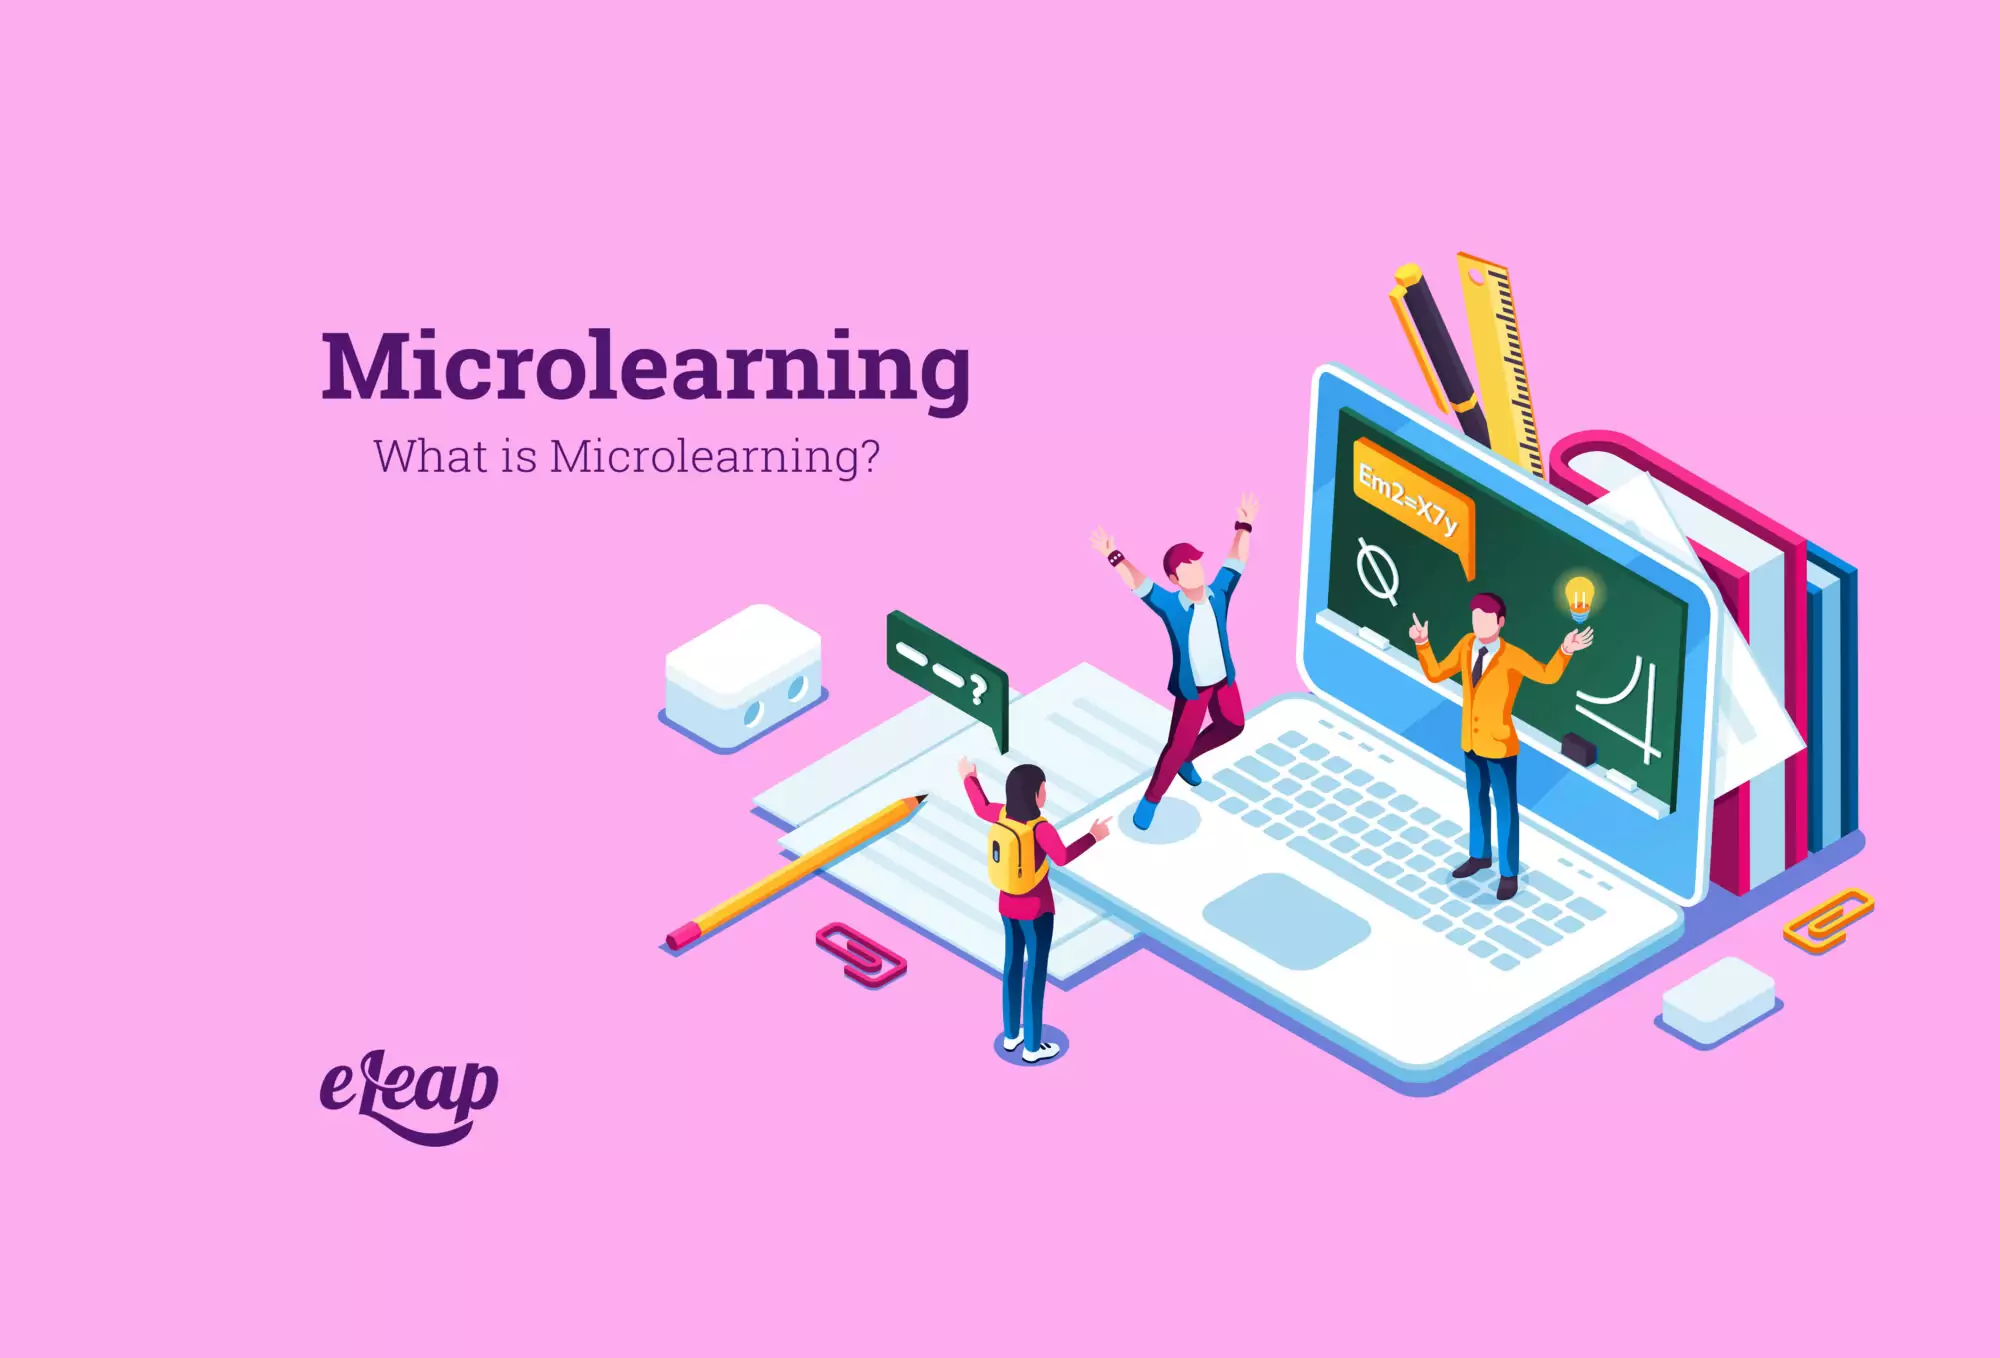 What is microlearning?